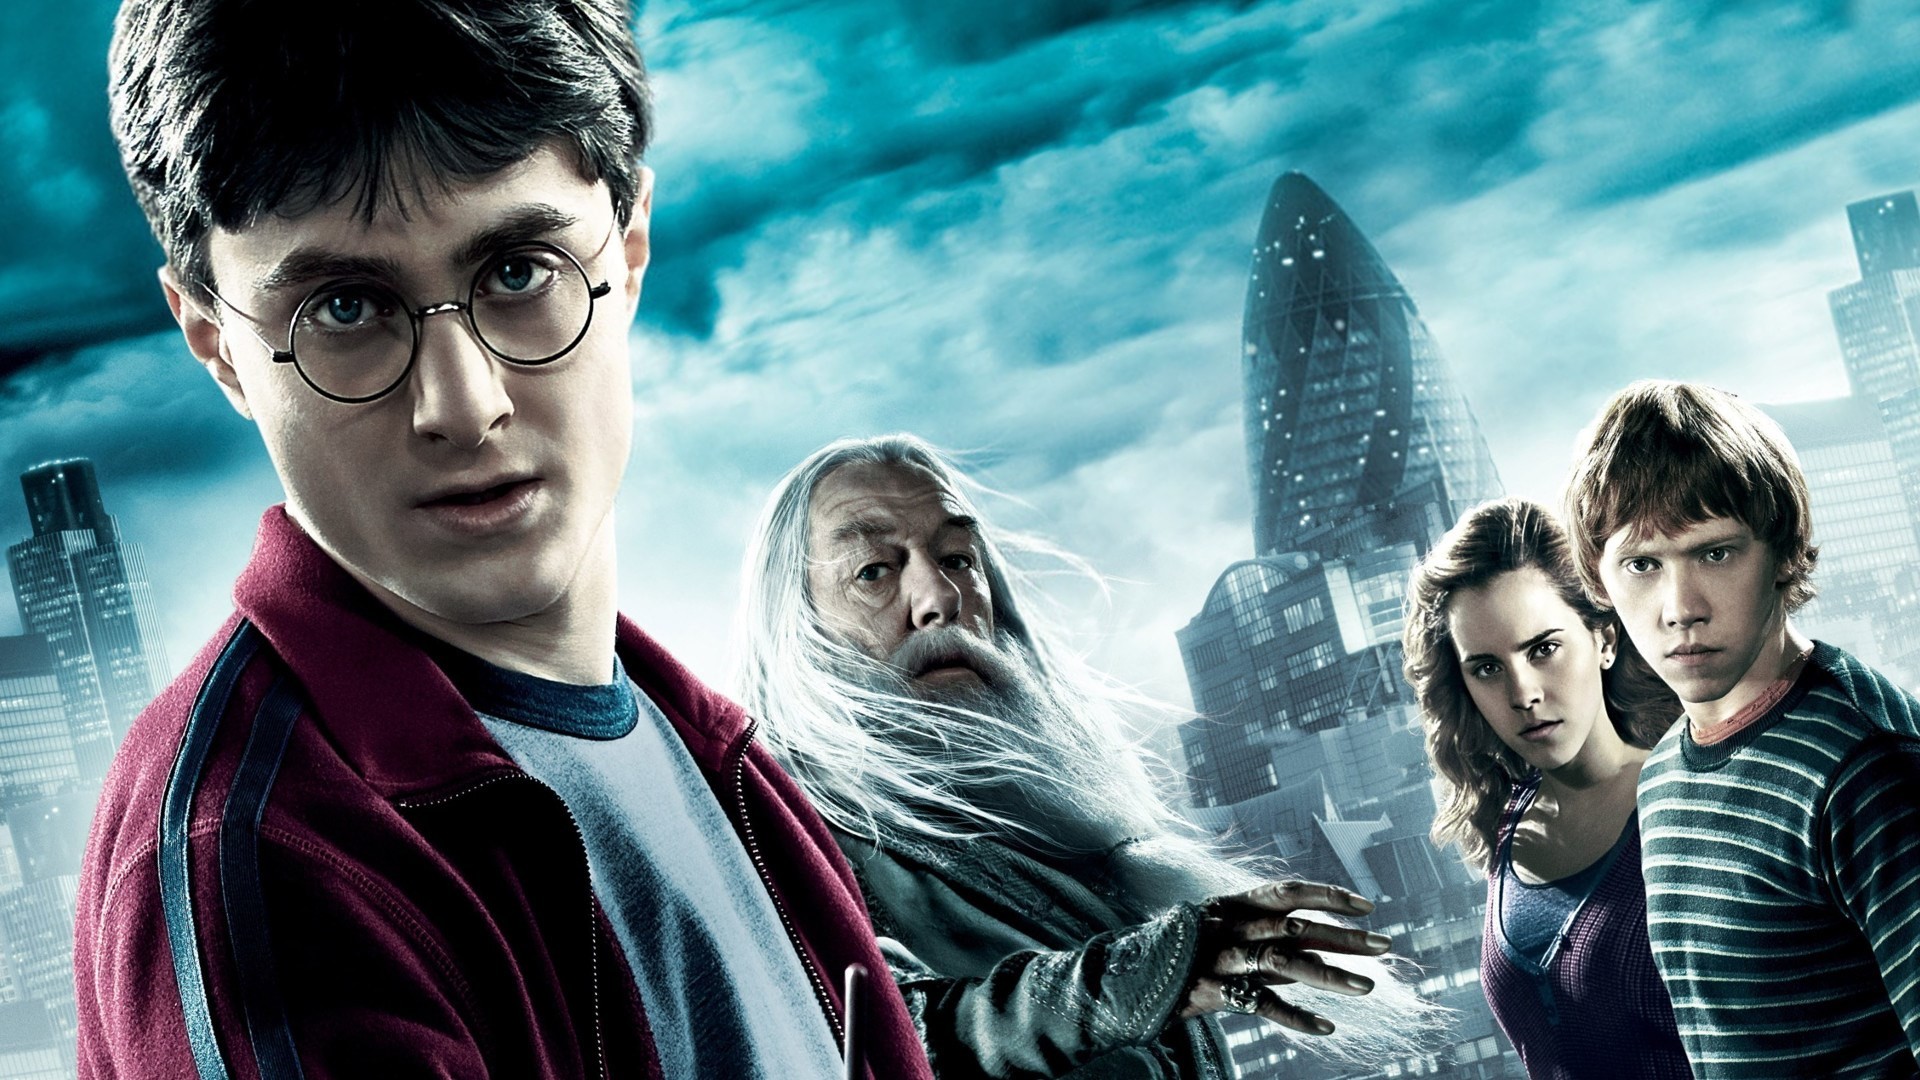 1920x1080 harry potter and the half blood prince pictures for large desktop,   (488 kB